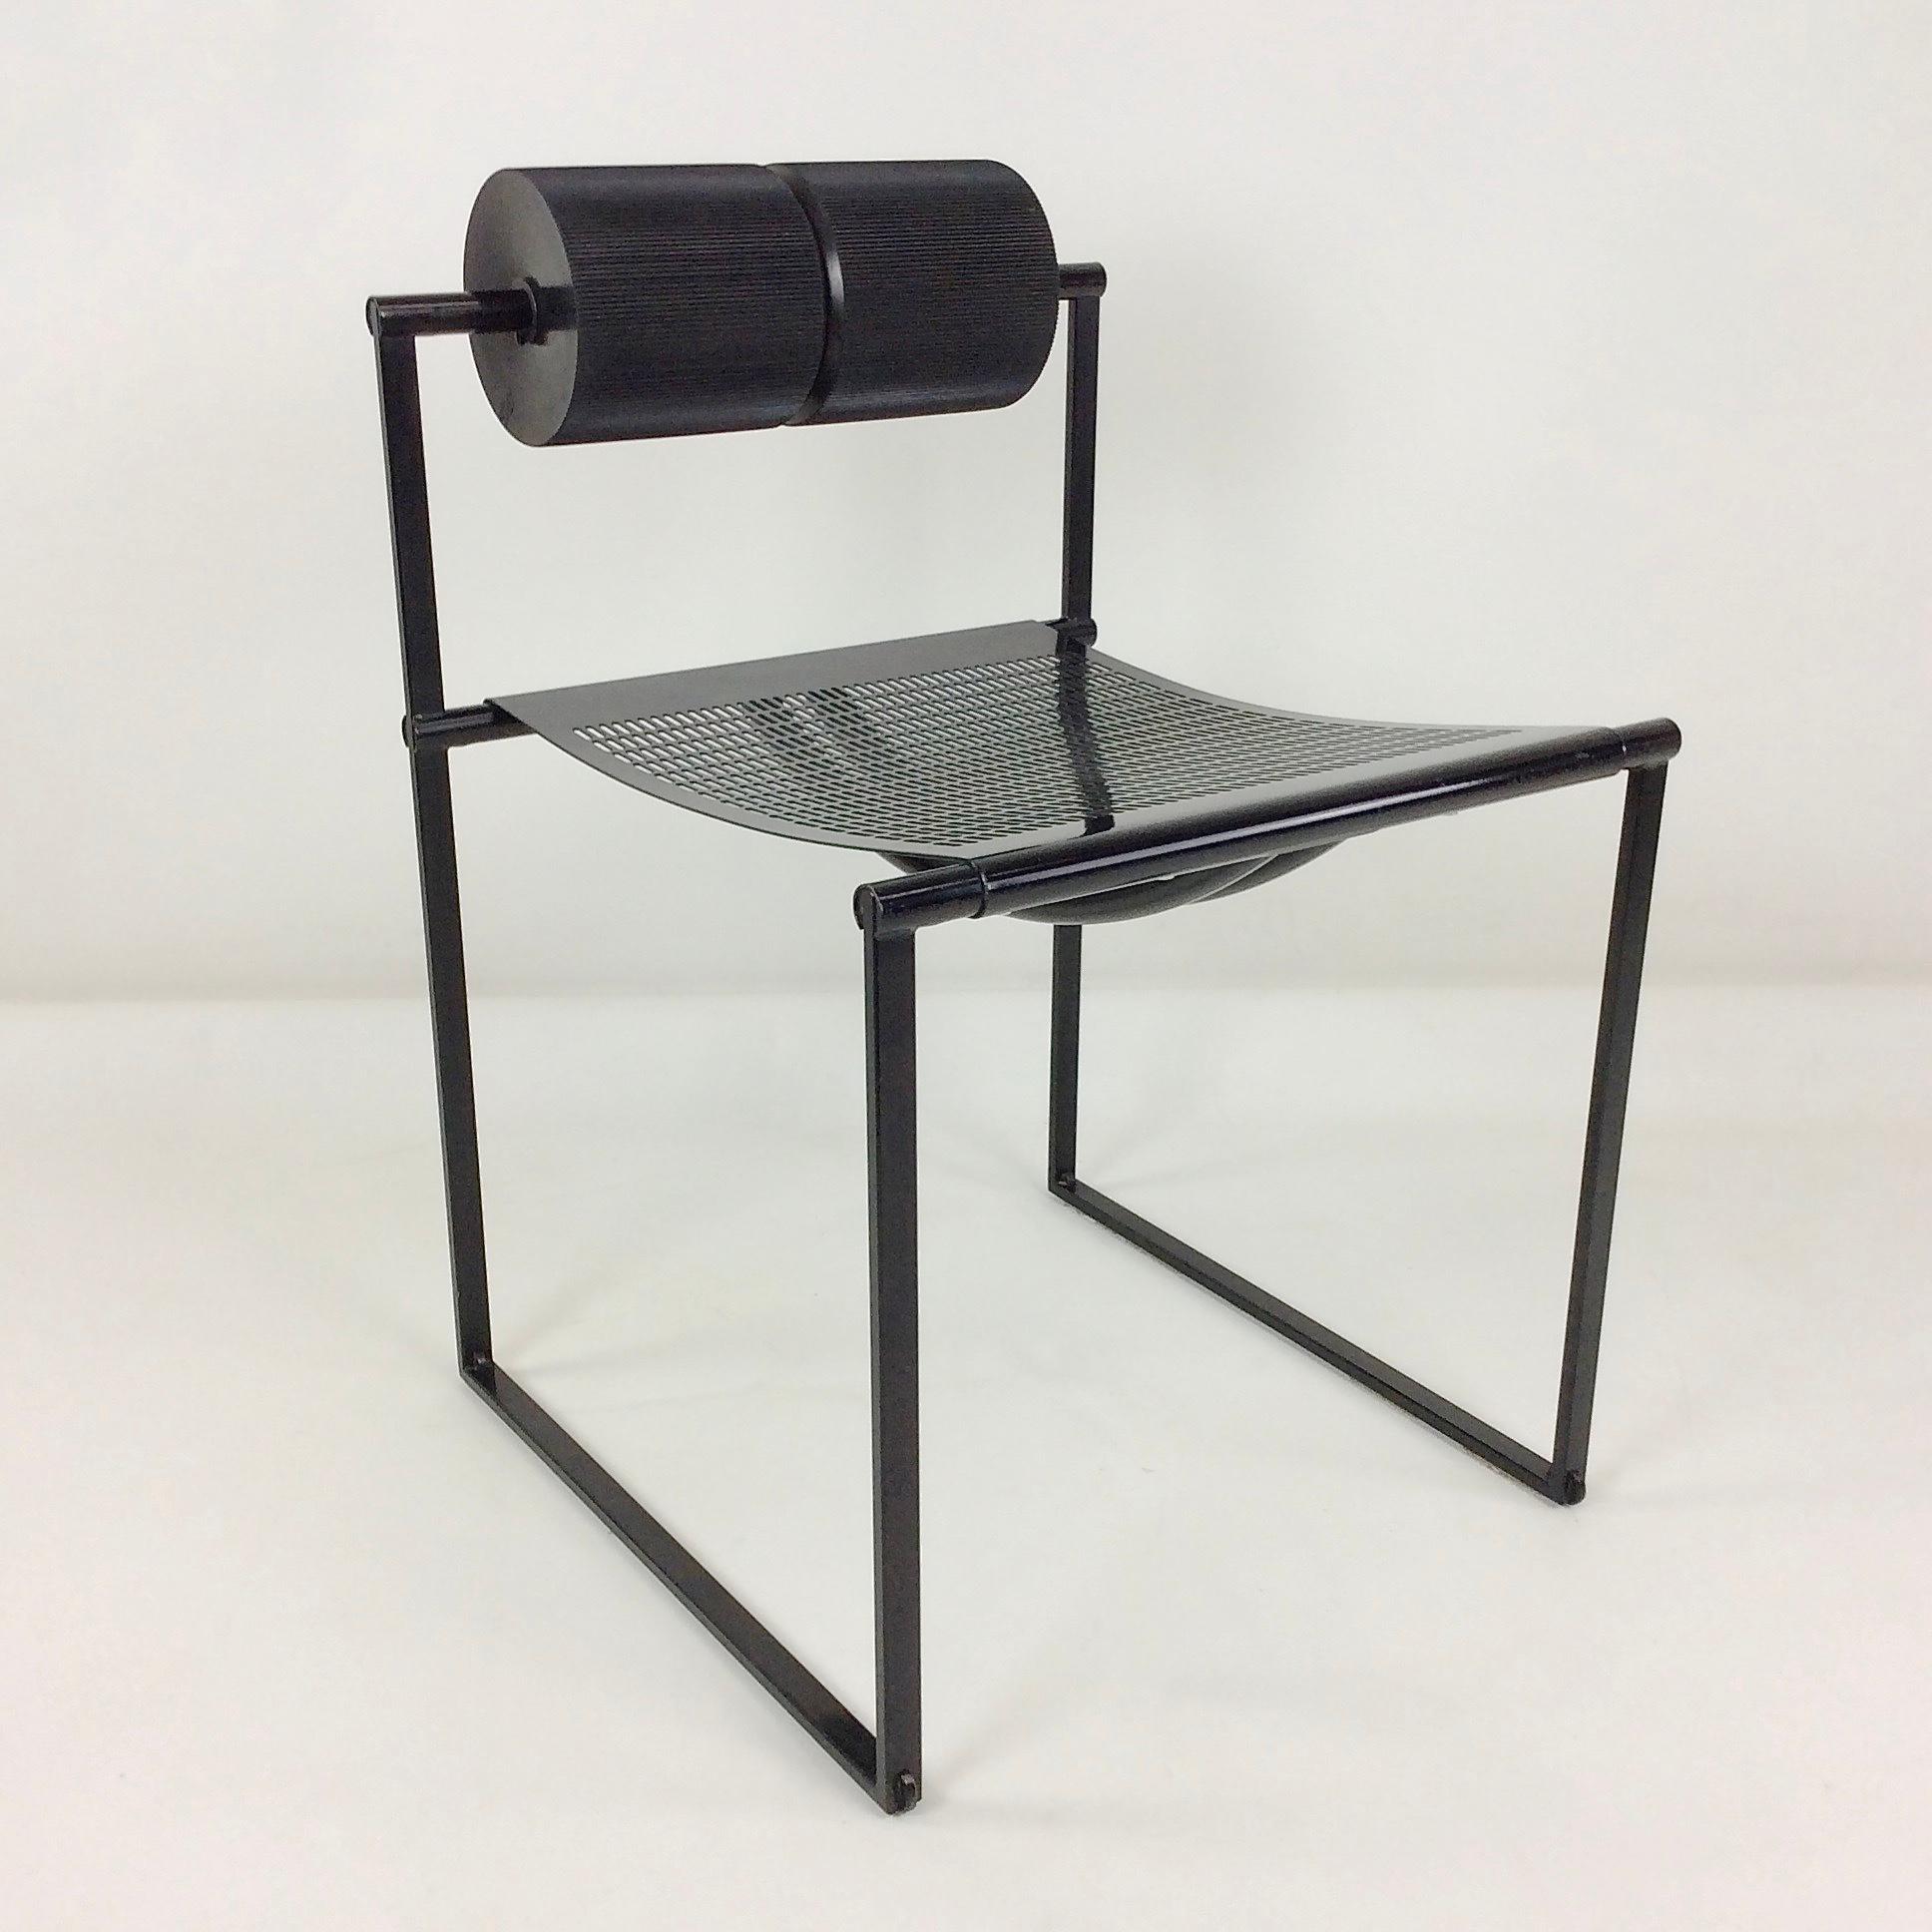 Mario Botta Prima chair by Alias, 1982, Italy.
Black enameled steel, polyurethane foam cylinder.
Dimensions: 71 cm H, 51 cm D, 48 cm W, seat height: 43 cm.
Good original condition.
All purchases are covered by our Buyer Protection